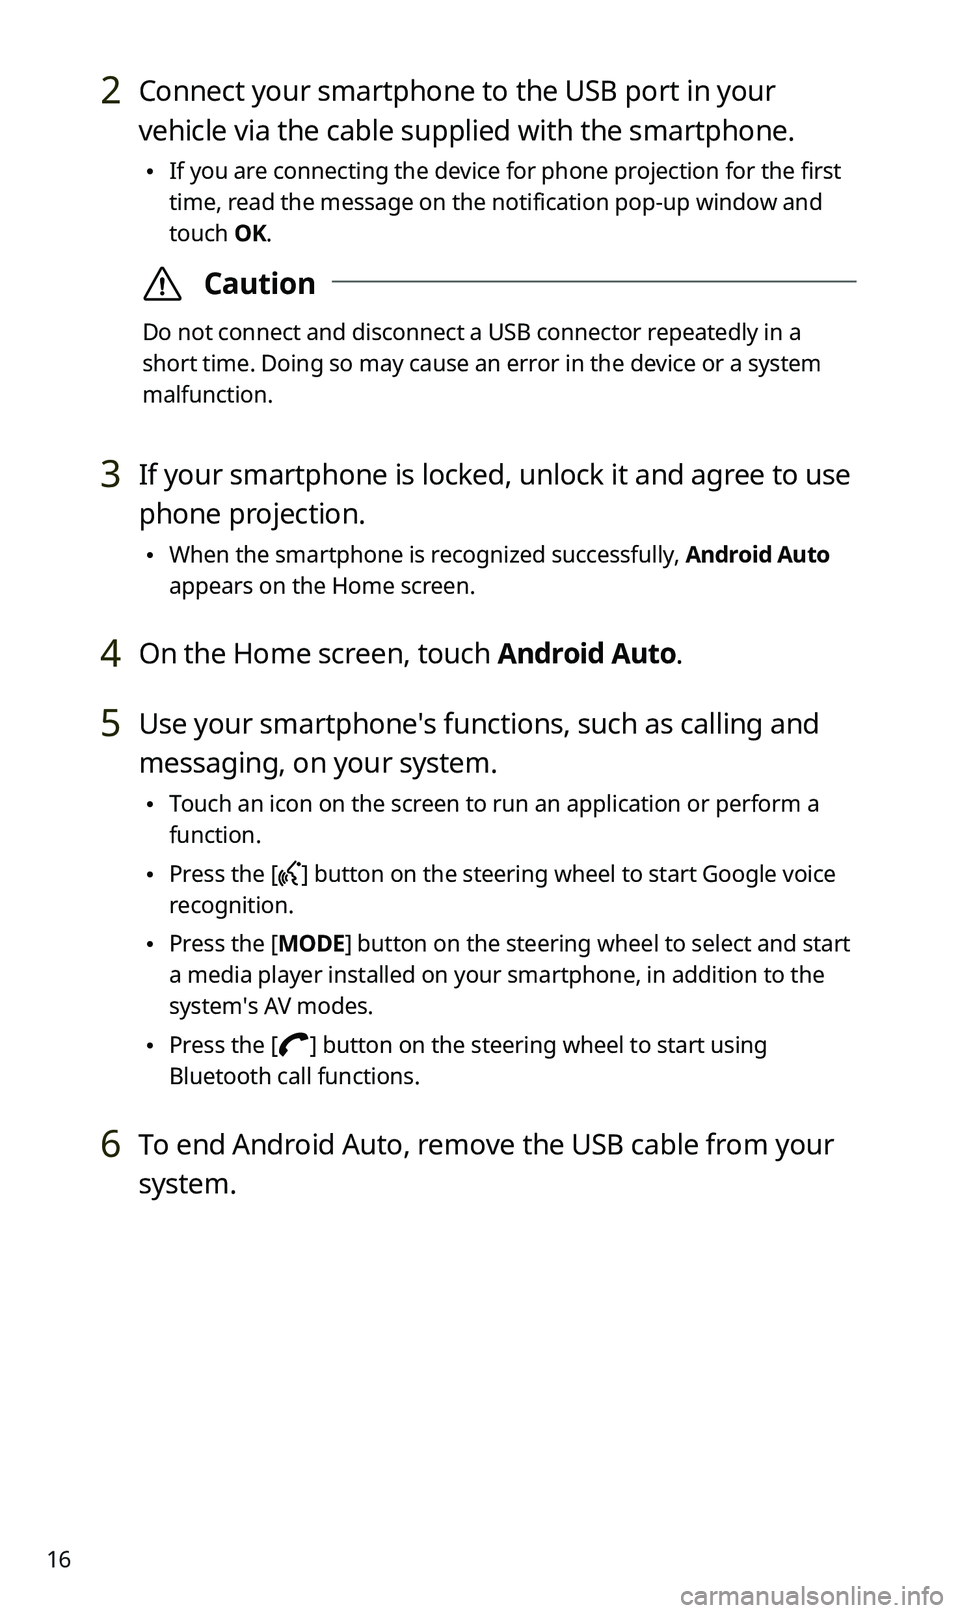 KIA SPORTAGE 2020  Quick Reference Guide 16
2 Connect your smartphone to the USB port in your 
vehicle via the cable supplied with the smartphone.
 •If you are connecting the device for phone projection for the first 
time, read the messag